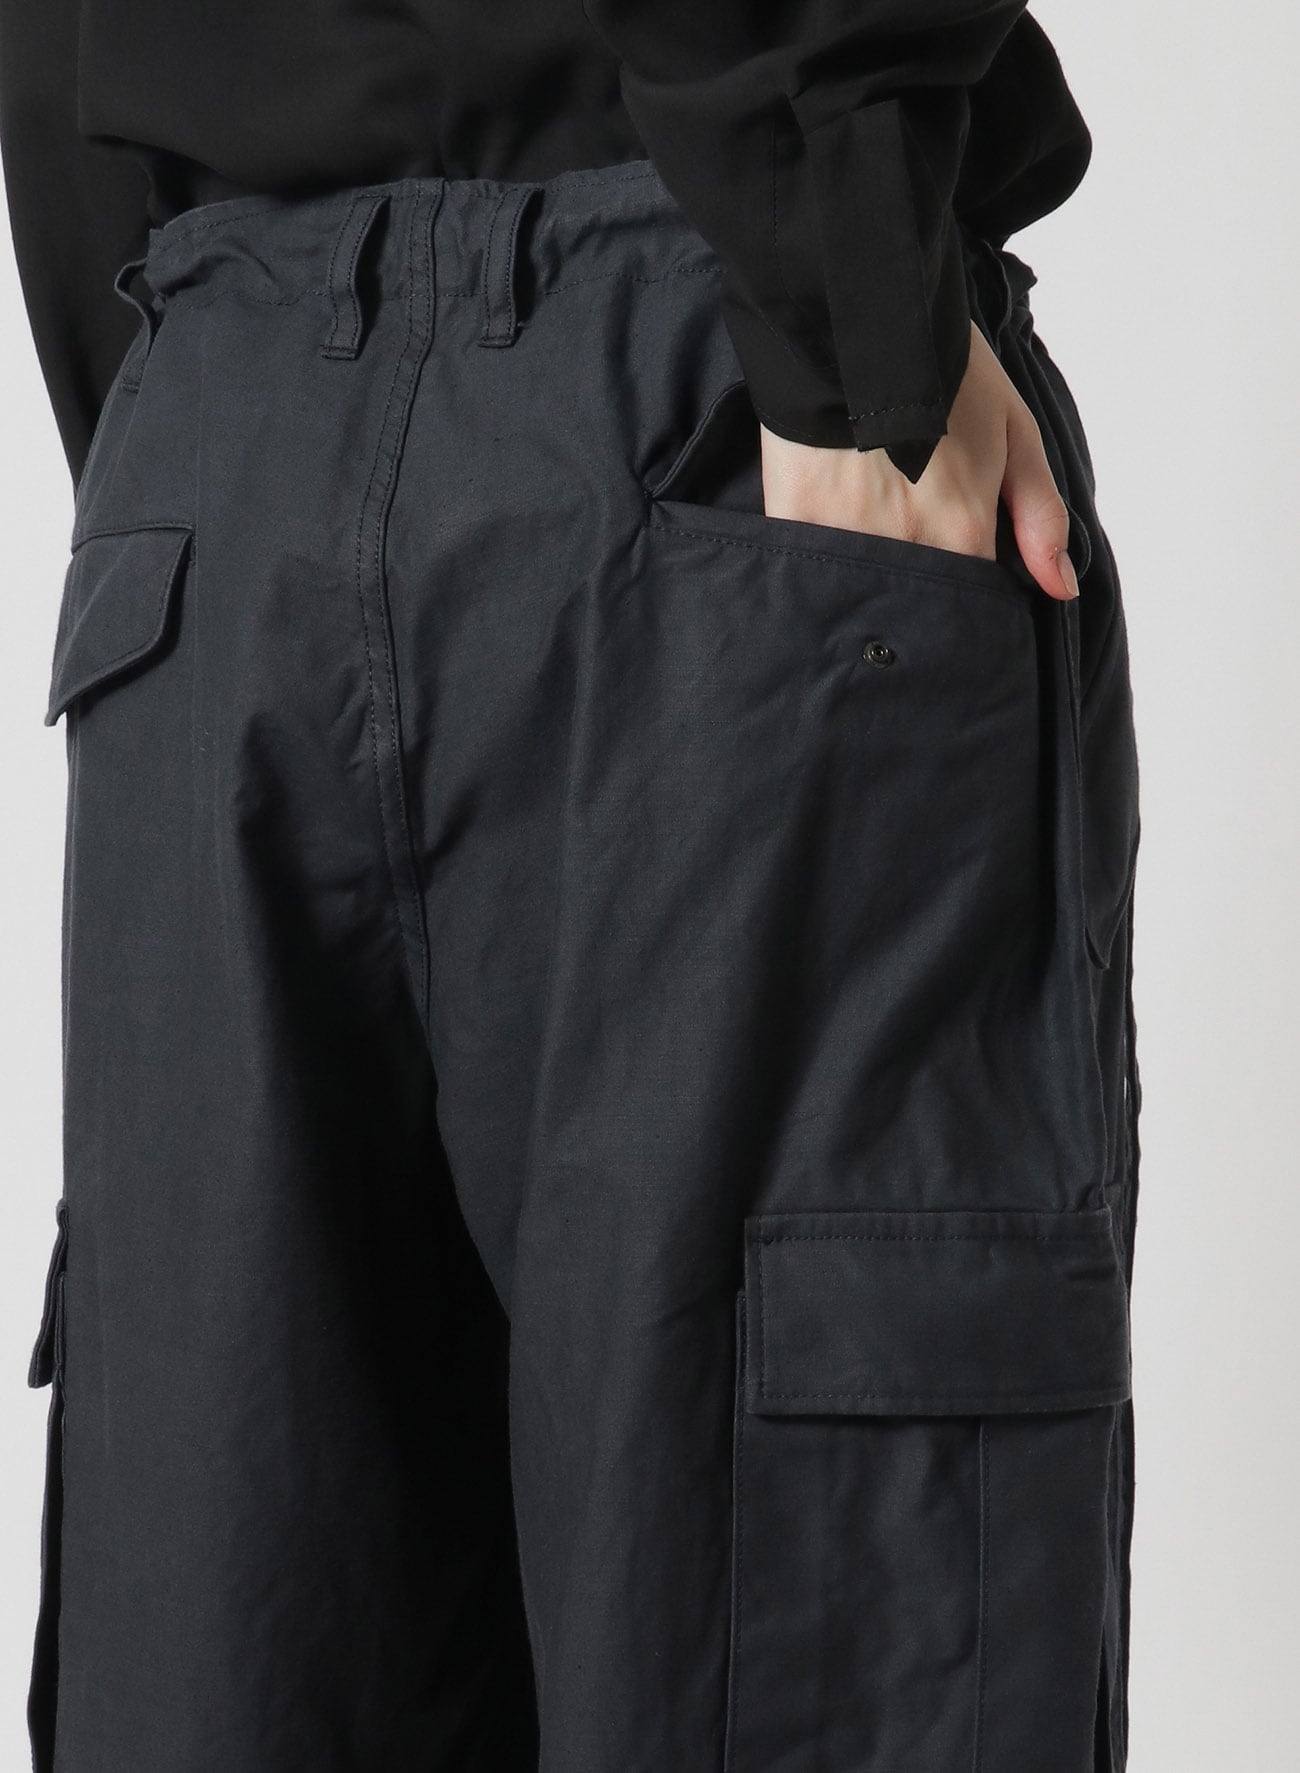 Y's-Black Name]BACKSIDE SULFURIZATION SATIN WRAP PANTS WITH 